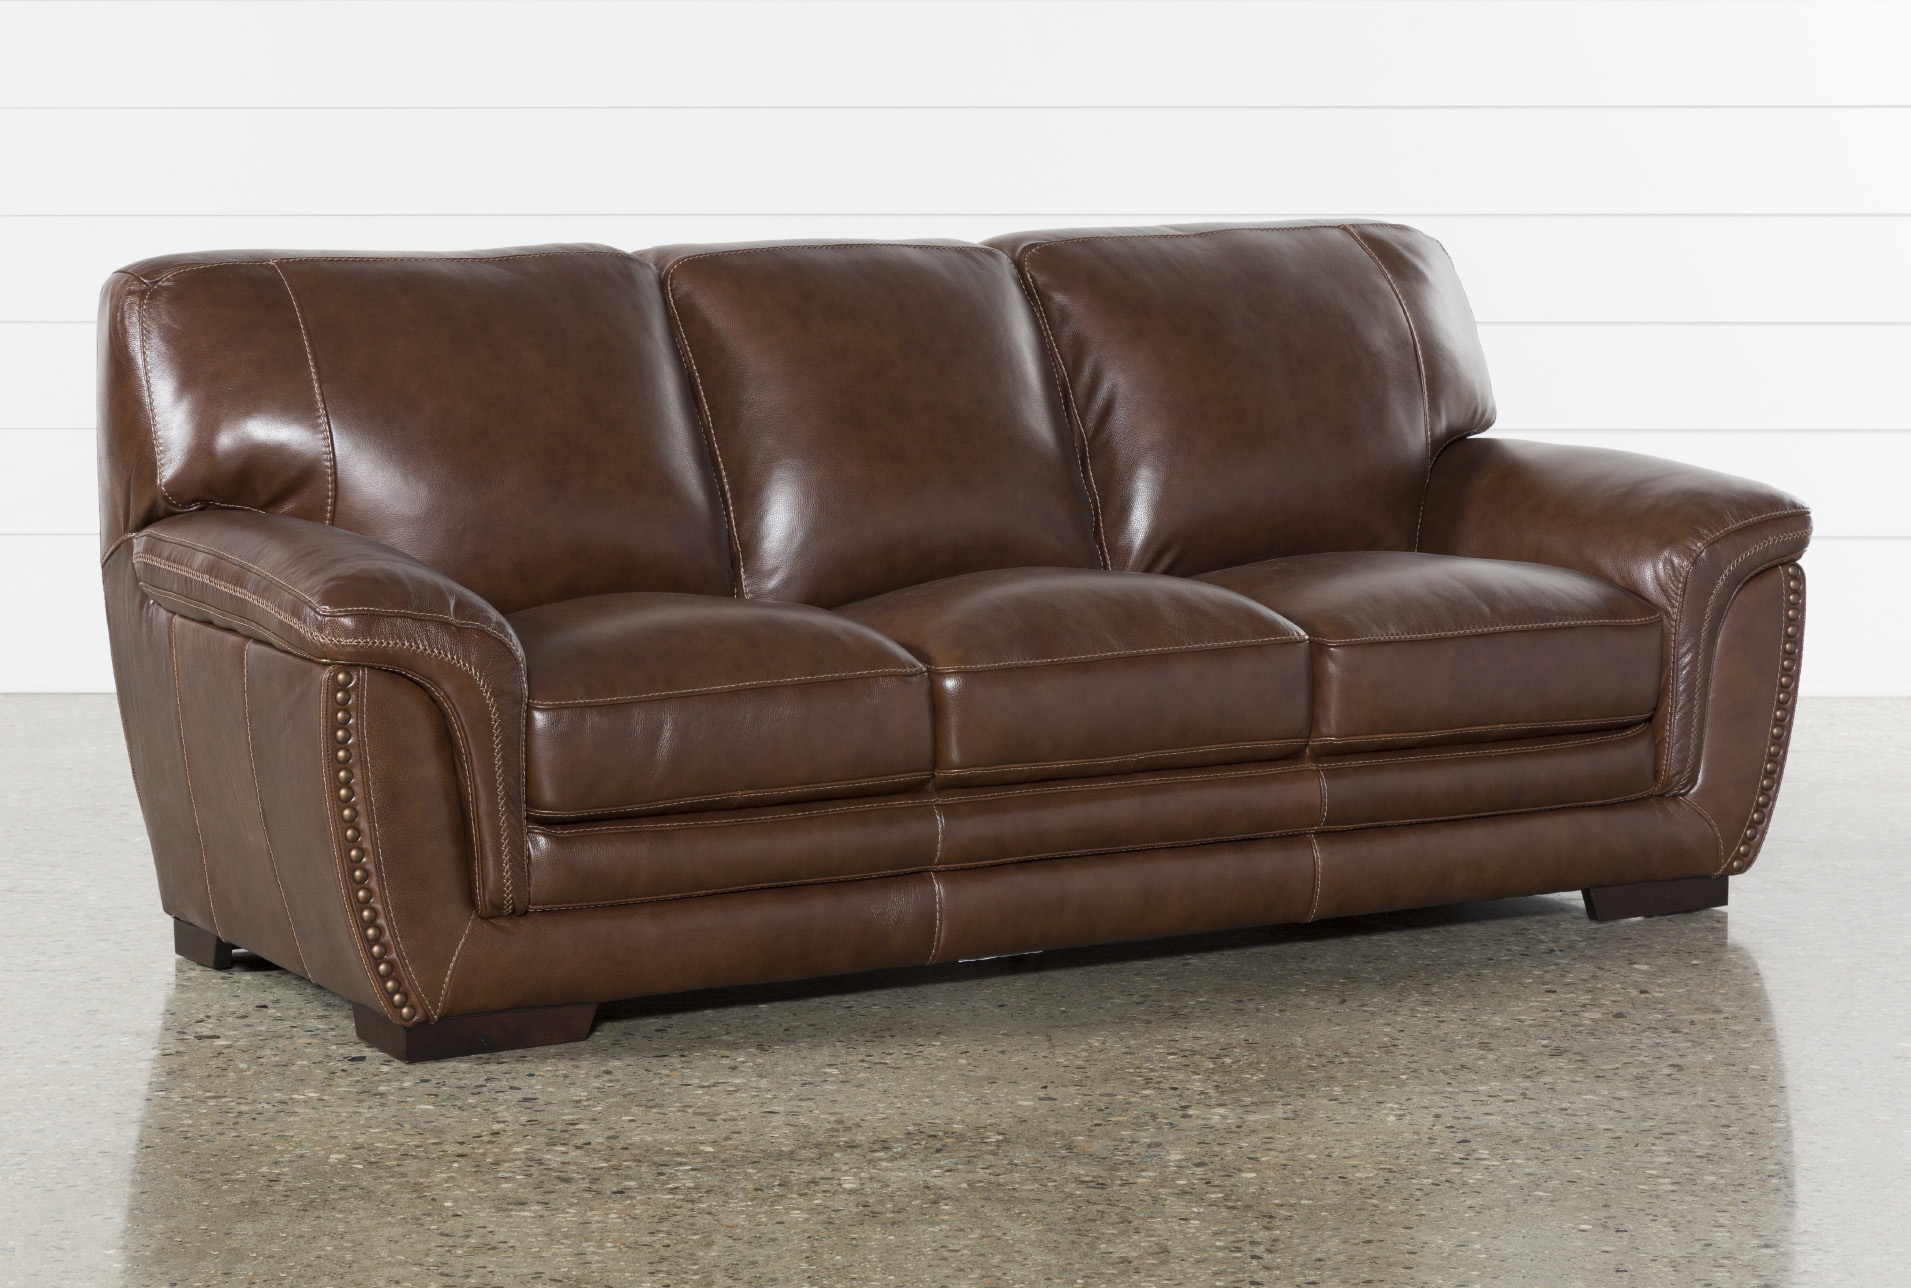 dual leather sofa 2 color brown and white